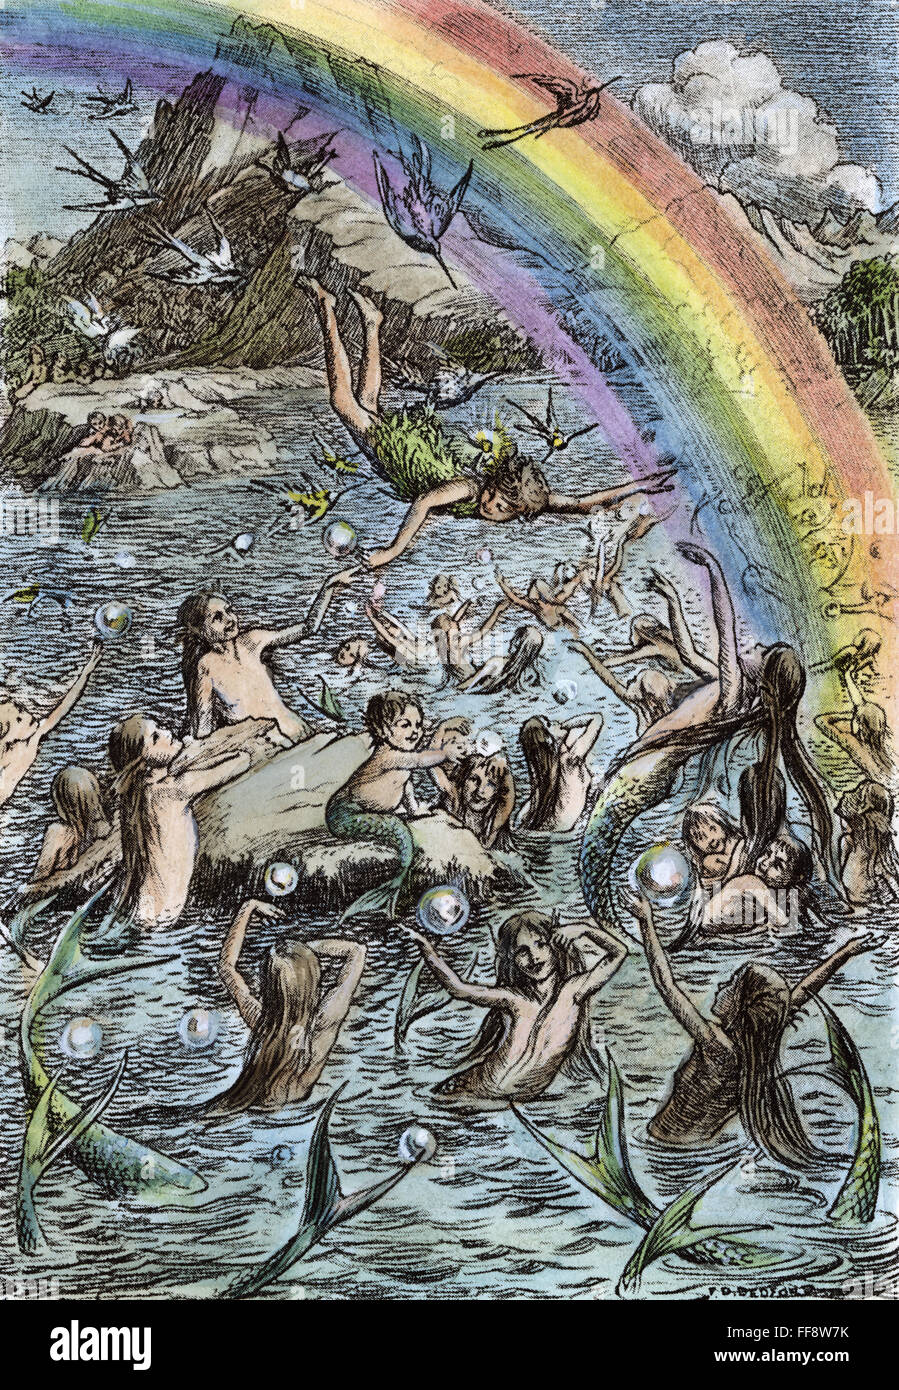 BARRIE: PETER PAN, 1911.  /nThe mermaids playing in the lagoon. Drawing by Francis D. Bedford for the 1911 edition of J.M. Barrie's 'Peter Pan.' Stock Photo